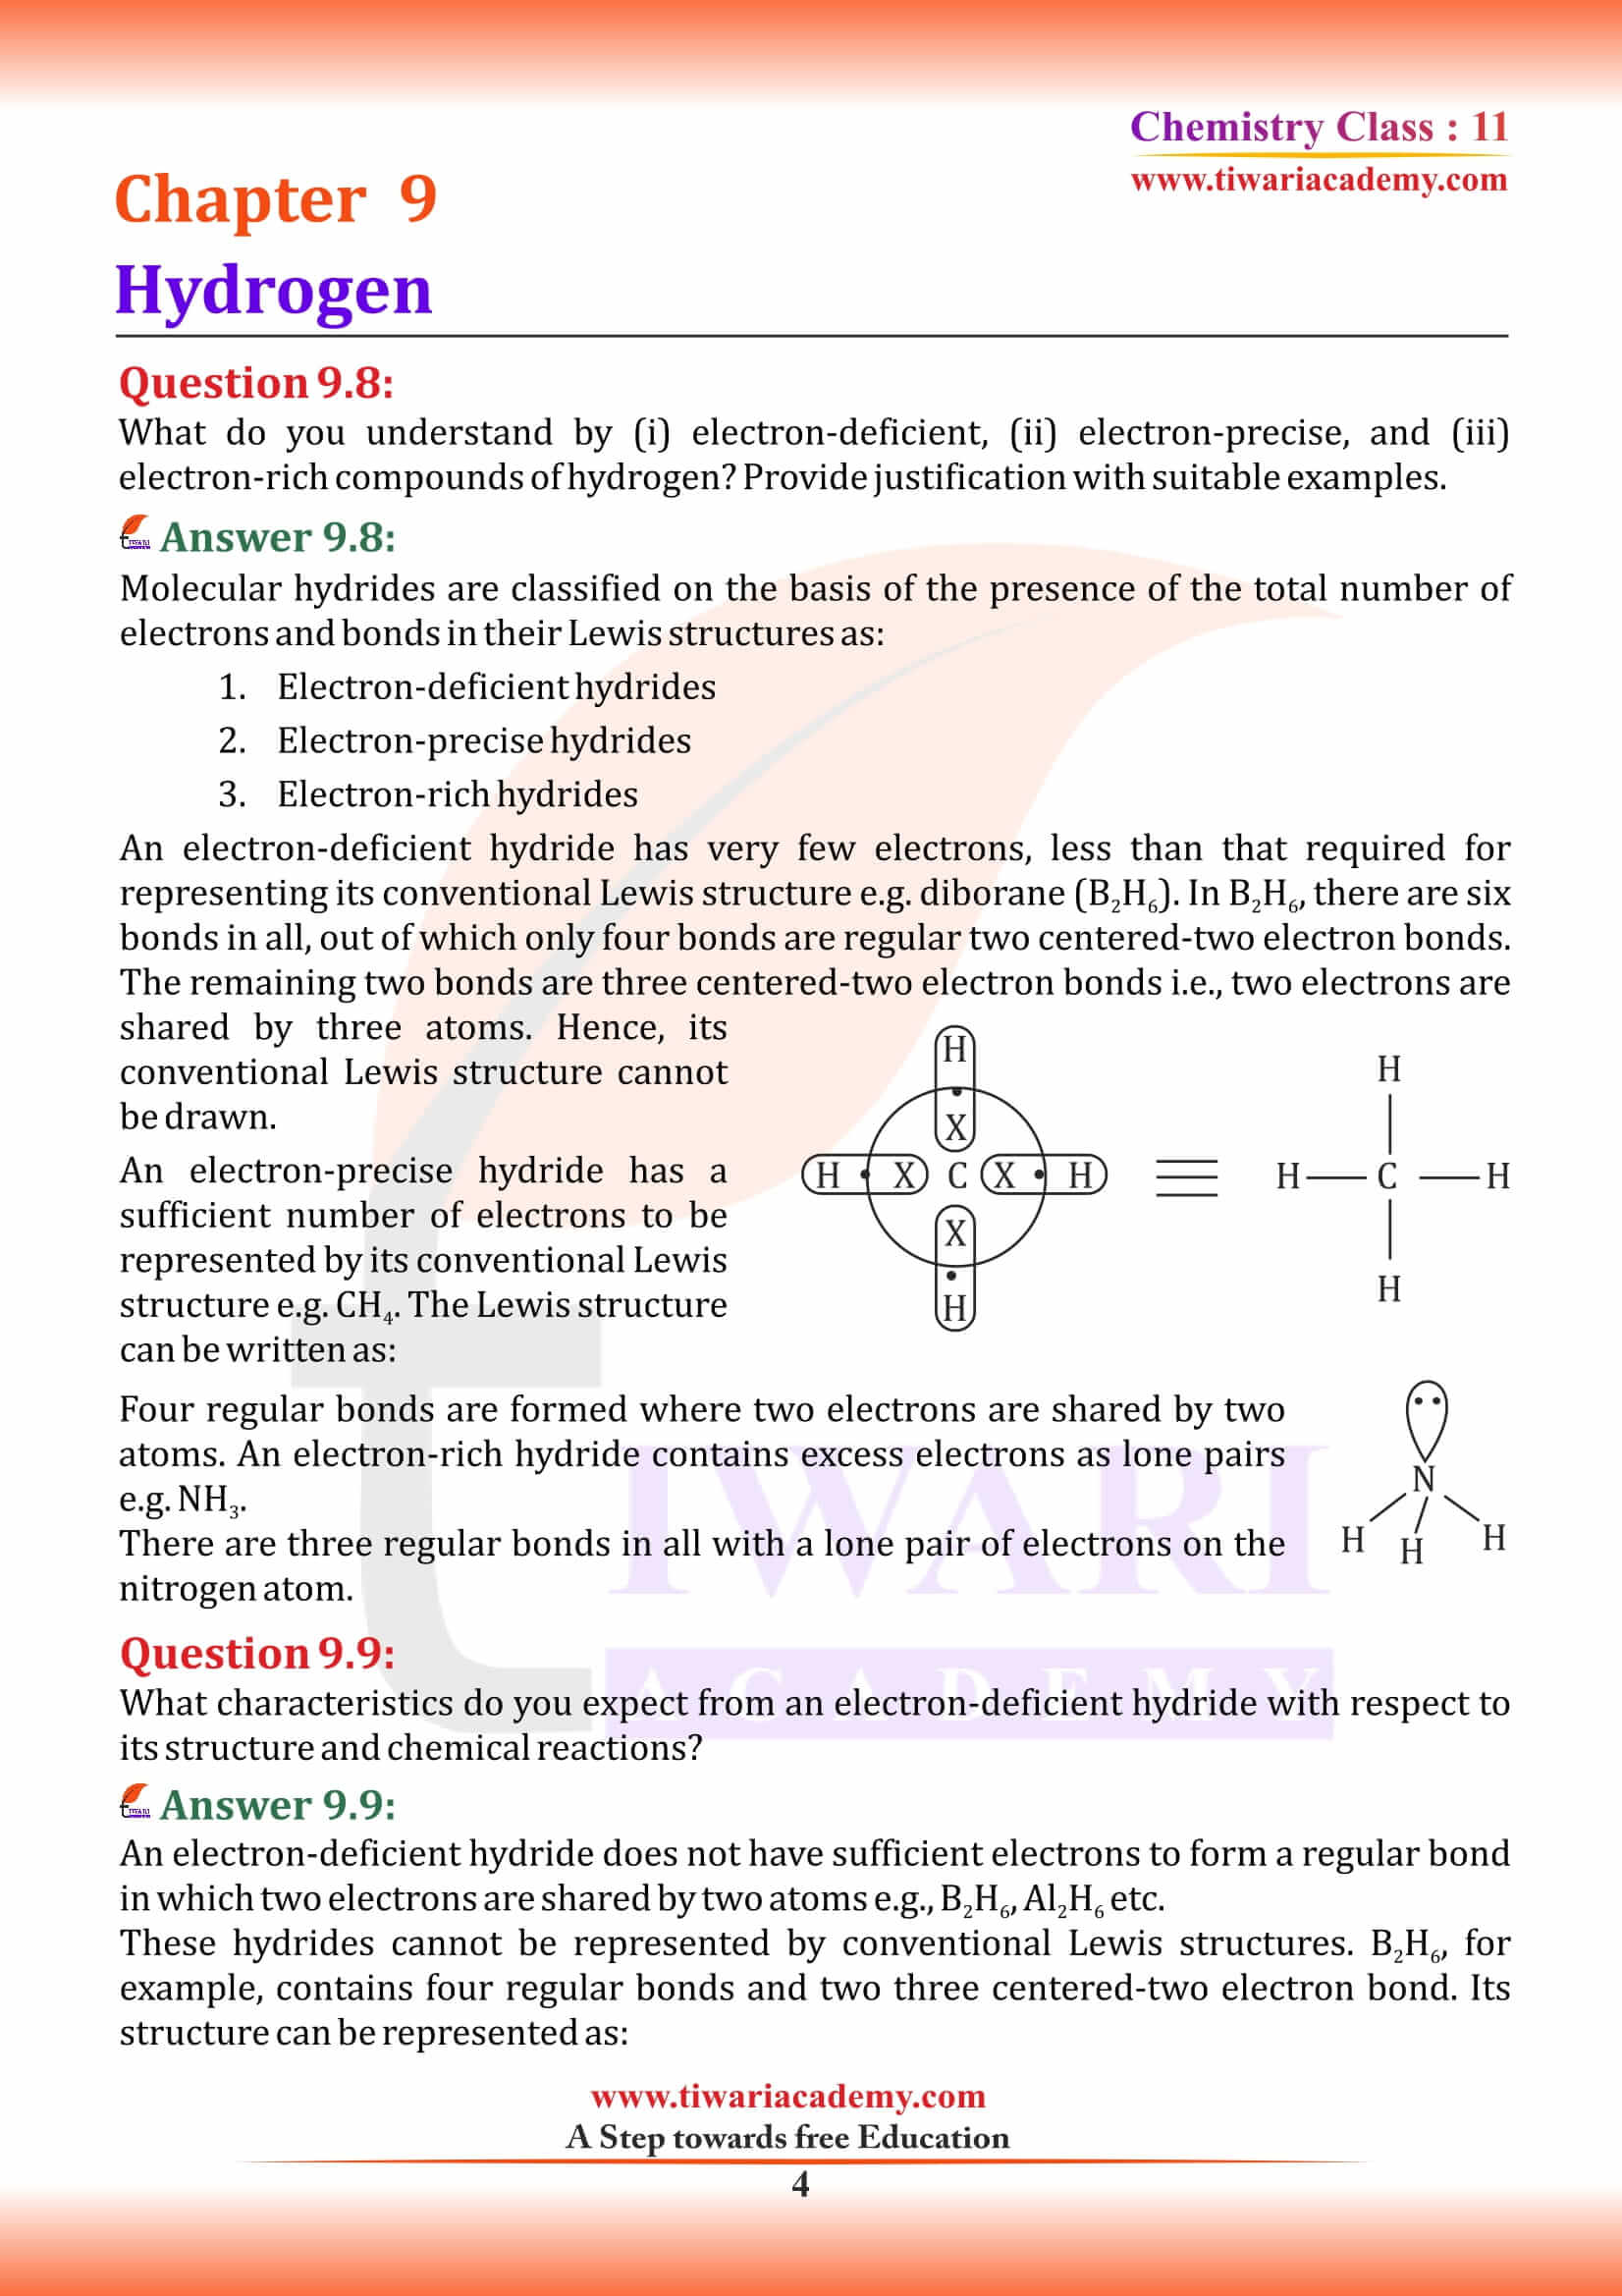 NCERT Solutions for Class 11 Chemistry Chapter 9 PDF file